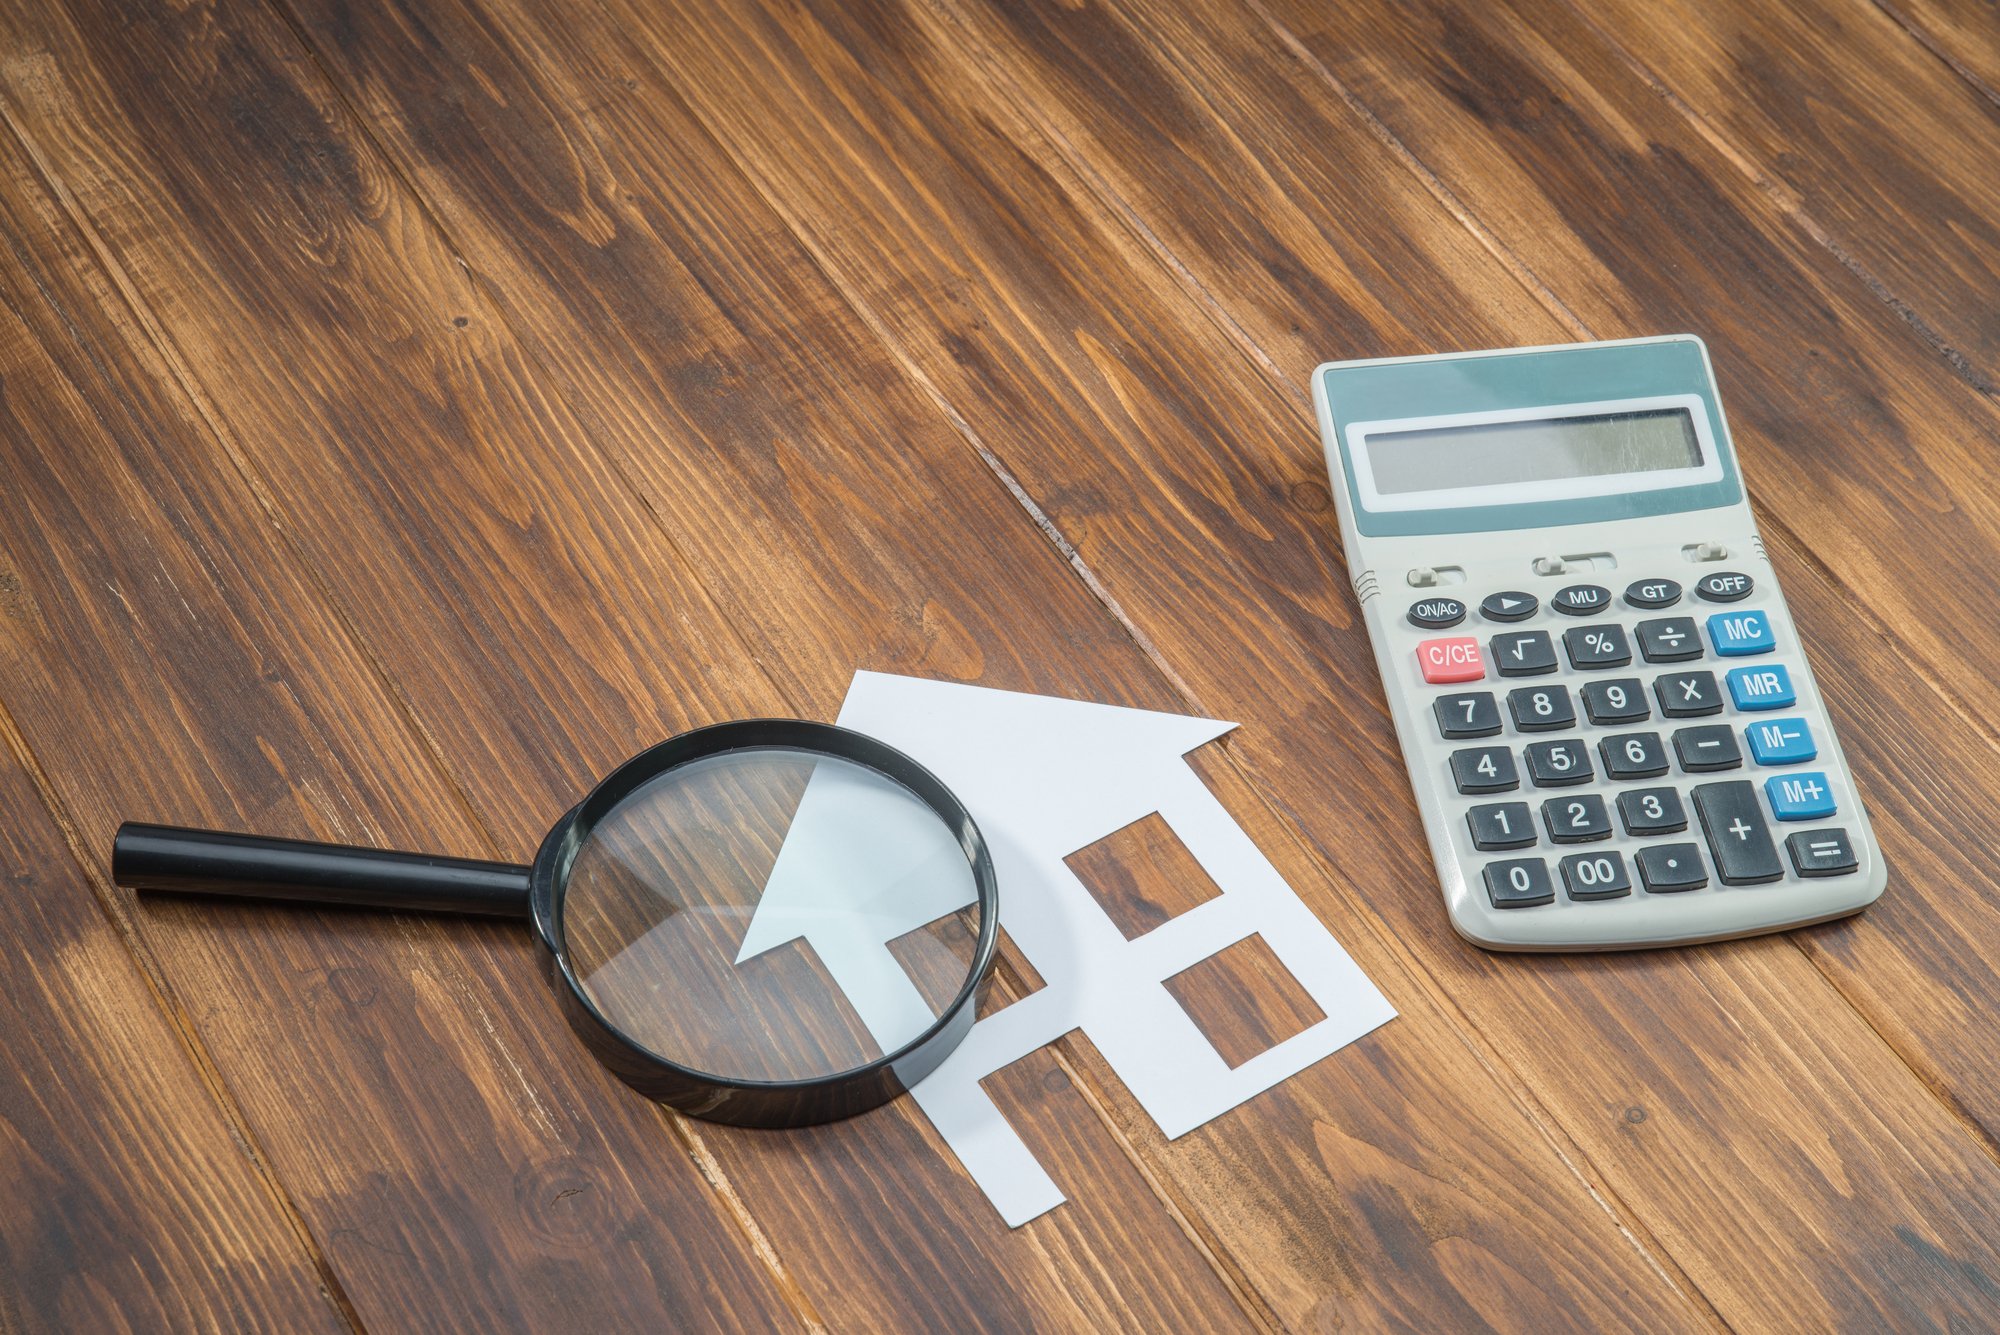 Buy house Mortgage calculations, calculator with Magnifier